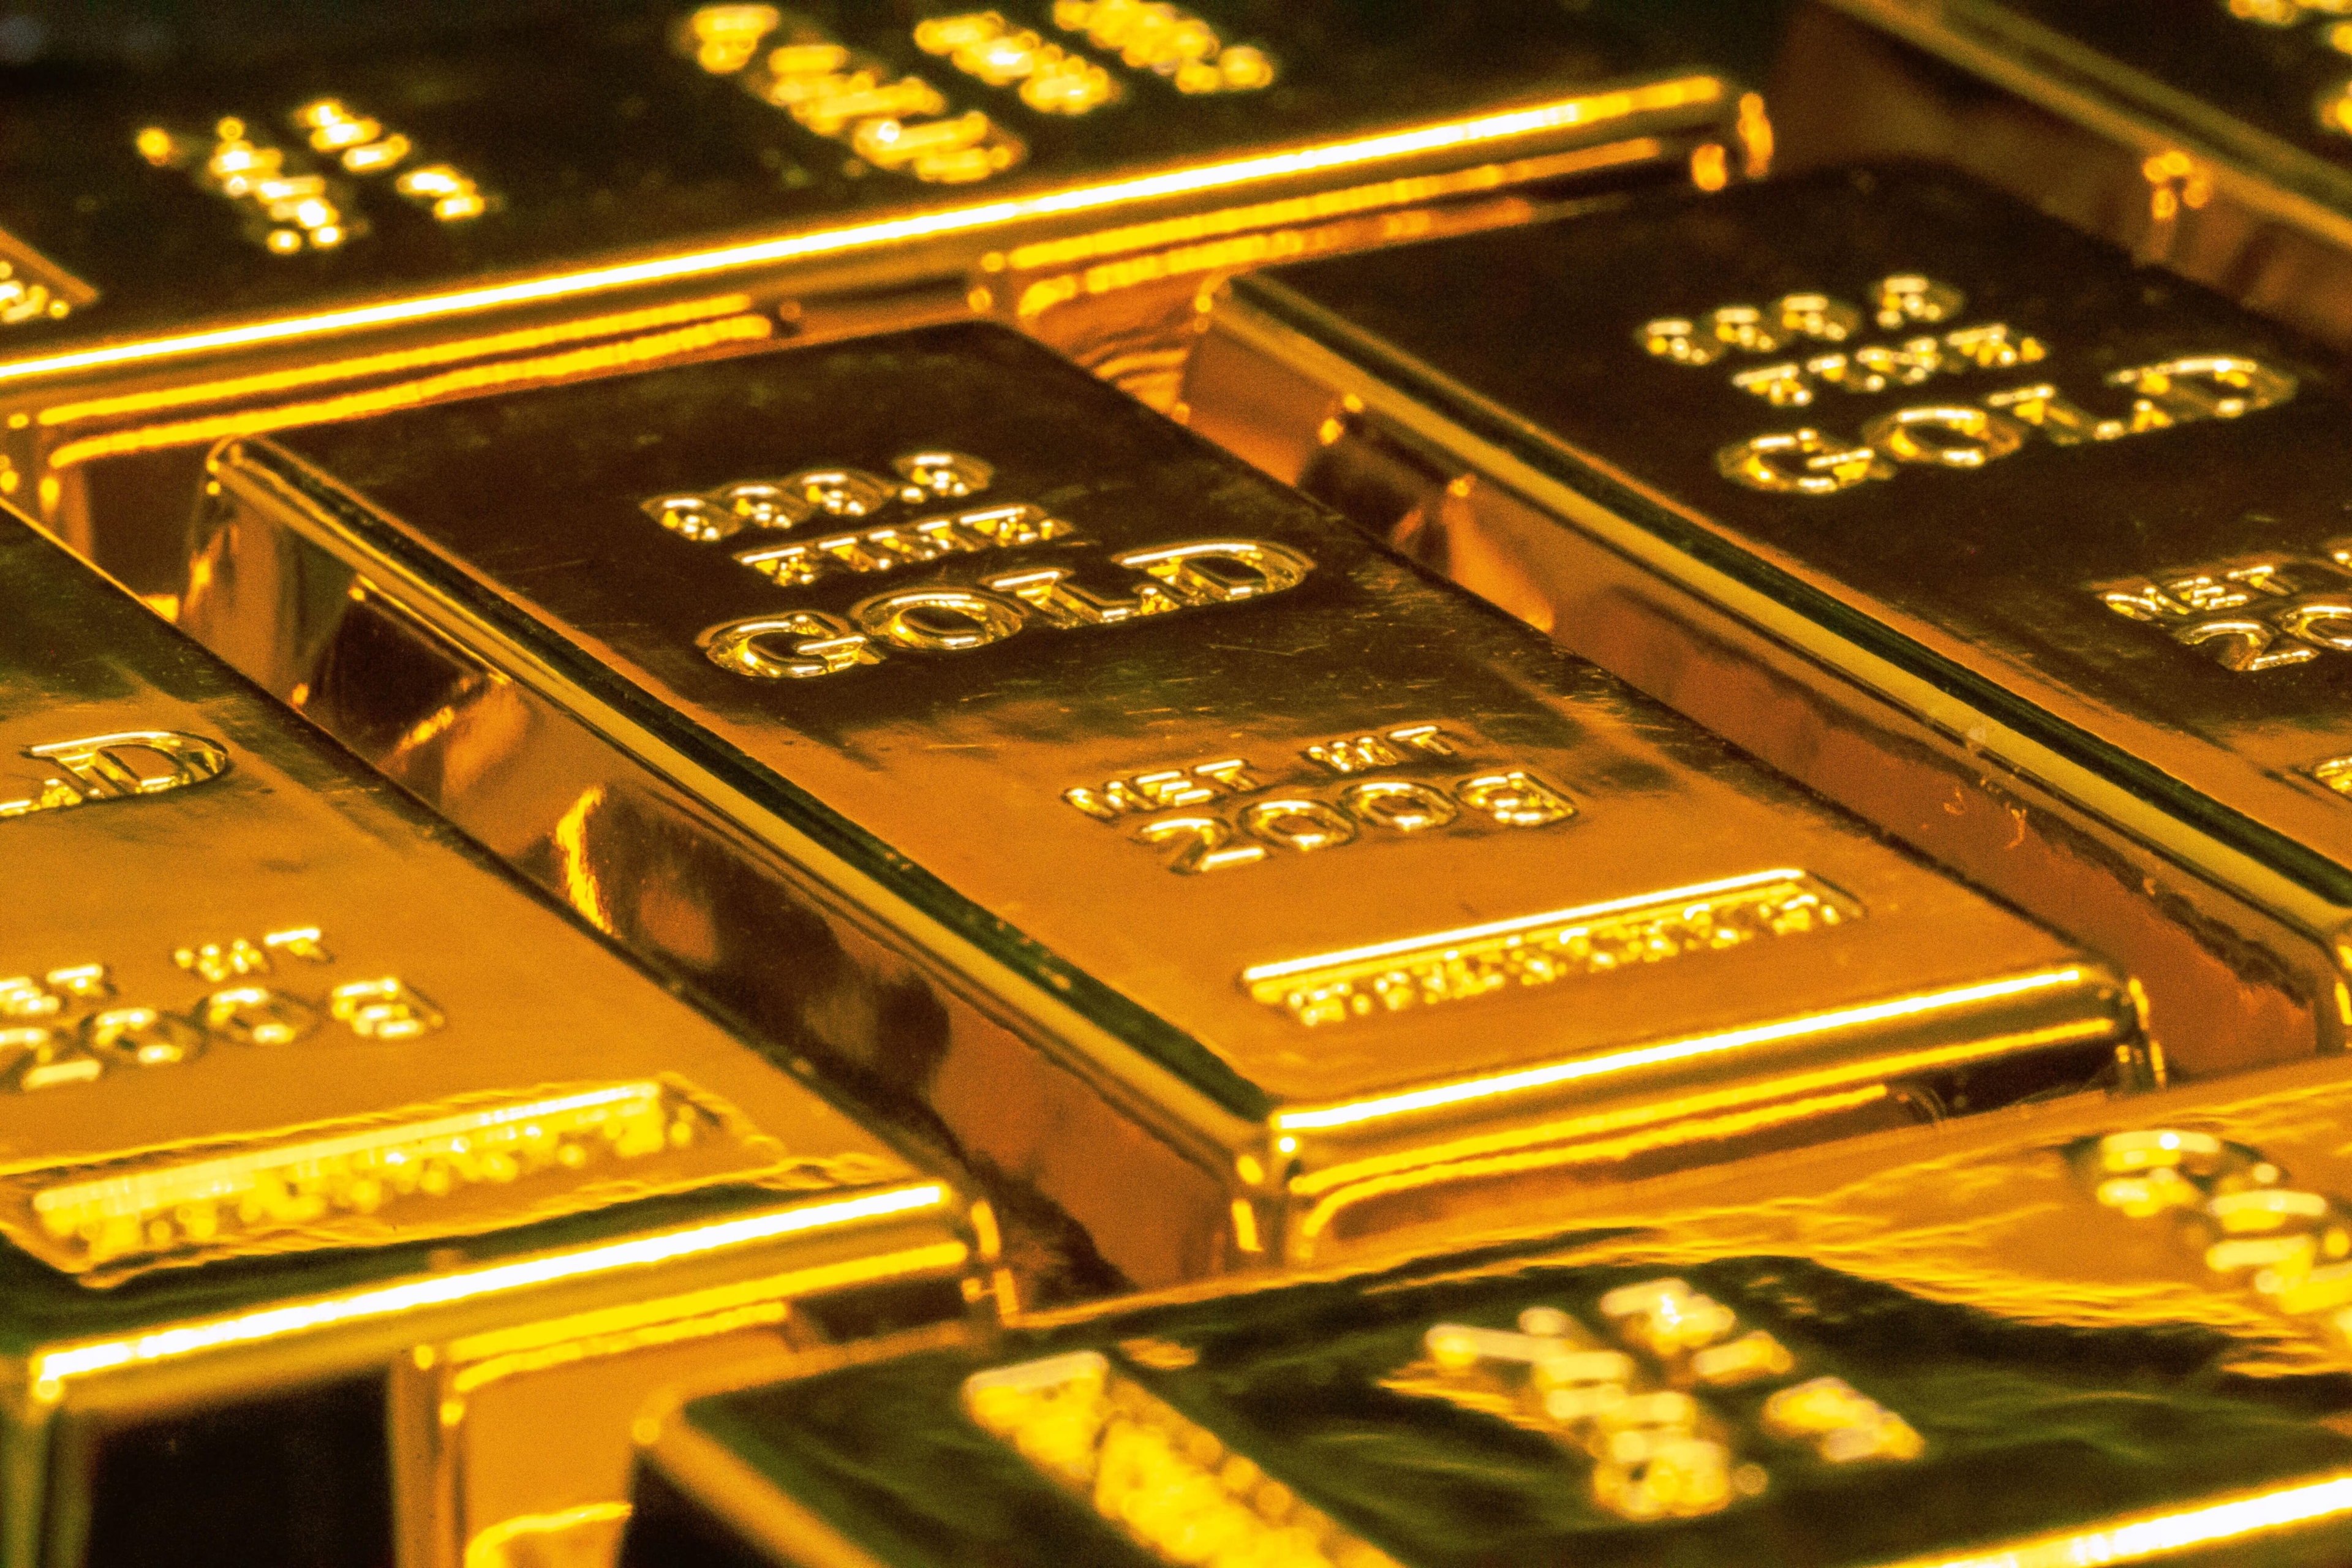 Gold settled on a positive note in the international markets on April 8. Gold June futures contract settled at $1,948.40 per troy ounce, up by 0.55 percent. Gold gained last week despite strength in the dollar index and the US bond yields. The yellow metal rose due to safe haven demand amid Russia-Ukraine conflicts, slower global growth prospects and fear of rising global inflations.